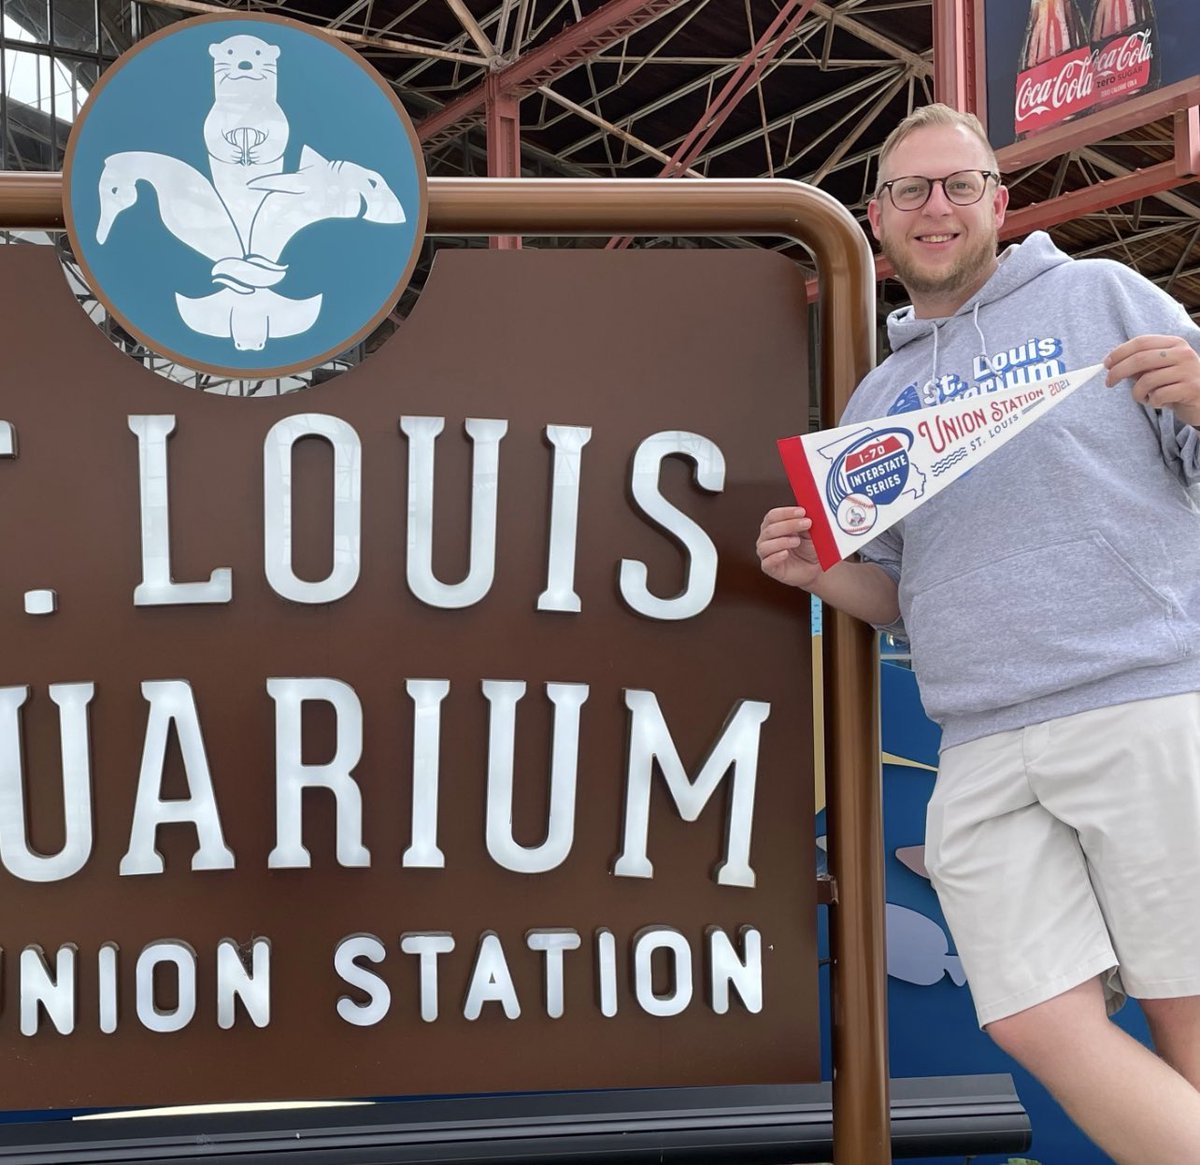 This Friday, Saturday and Sunday ➡️ Guests 12 and under that visit the Aquarium or @stlouiswheel will get a free baseball pennant in honor of the I70 Series this weekend with the @cardinals and @Royals! *while supplies last